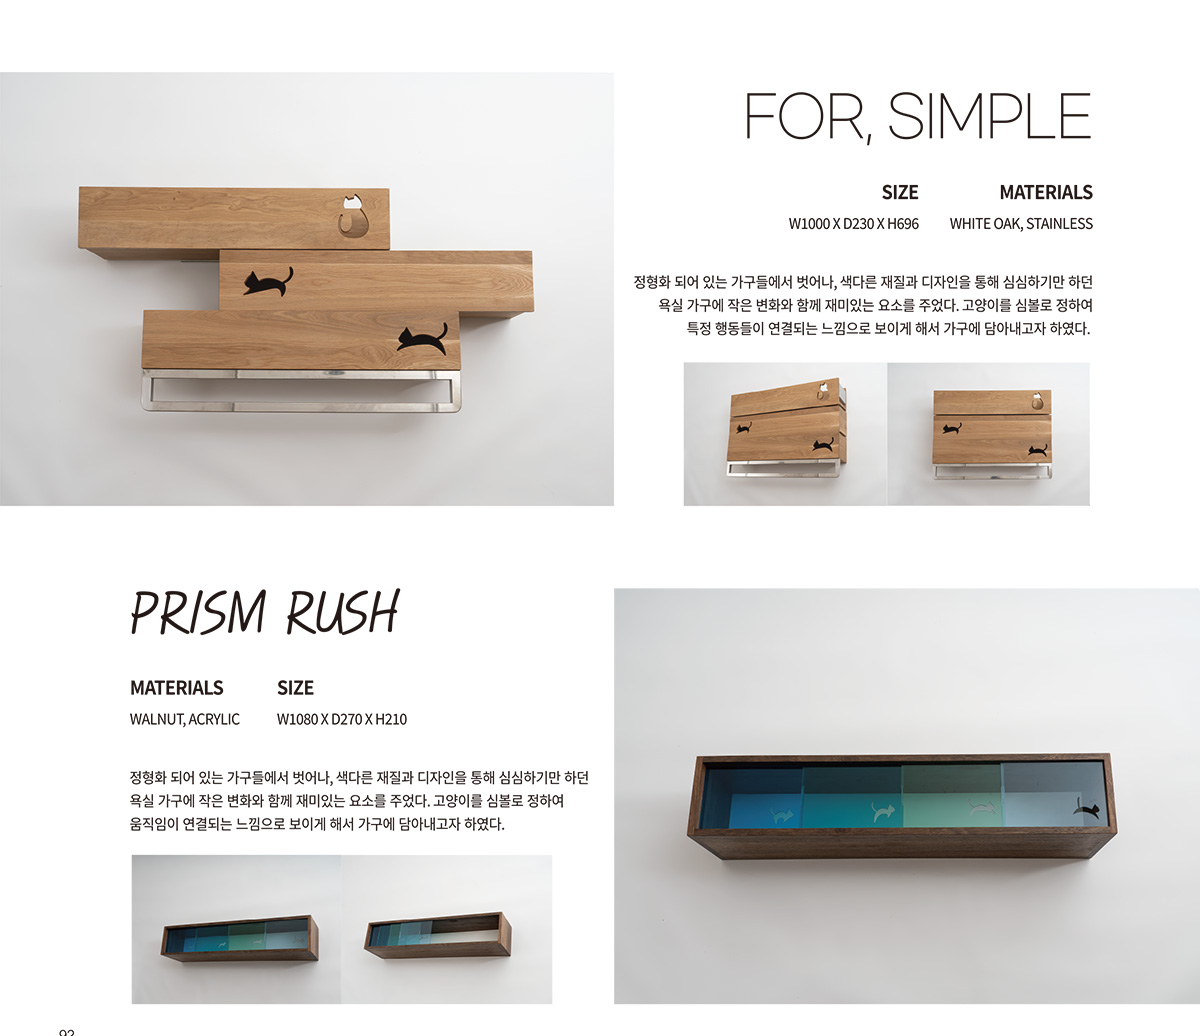 FOR SIMPLE & PRISM RUSH 이미지